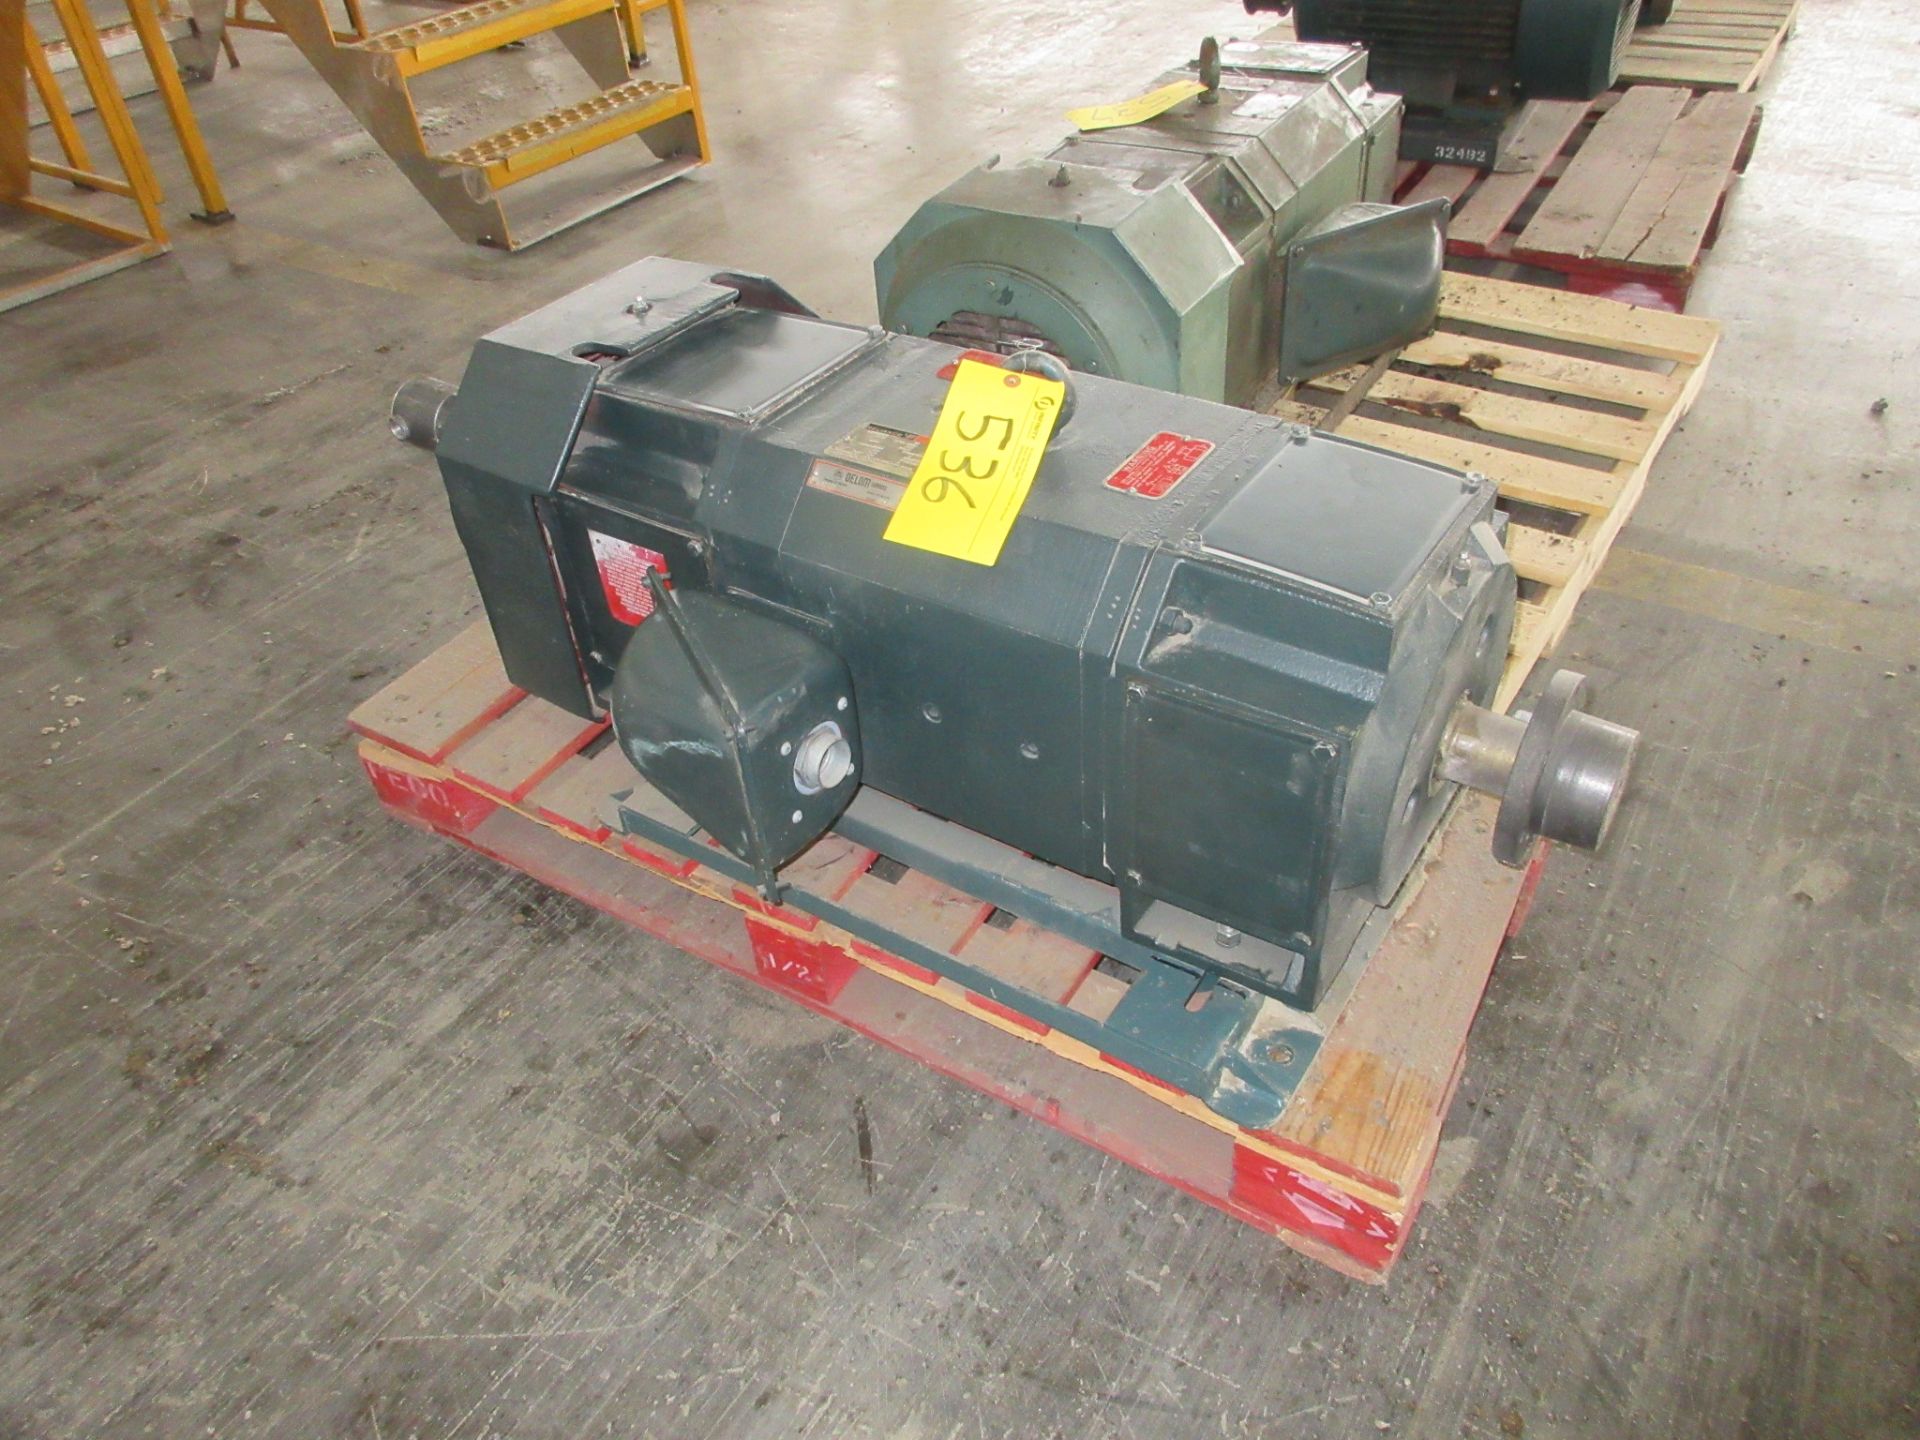 RELIANCE RPM III D-C MOTOR, 30HP, 500V, 1,750 / 2,300 RPM, LC2812AT2 FRAME (SOUTHWEST WAREHOUSE) - Image 3 of 3